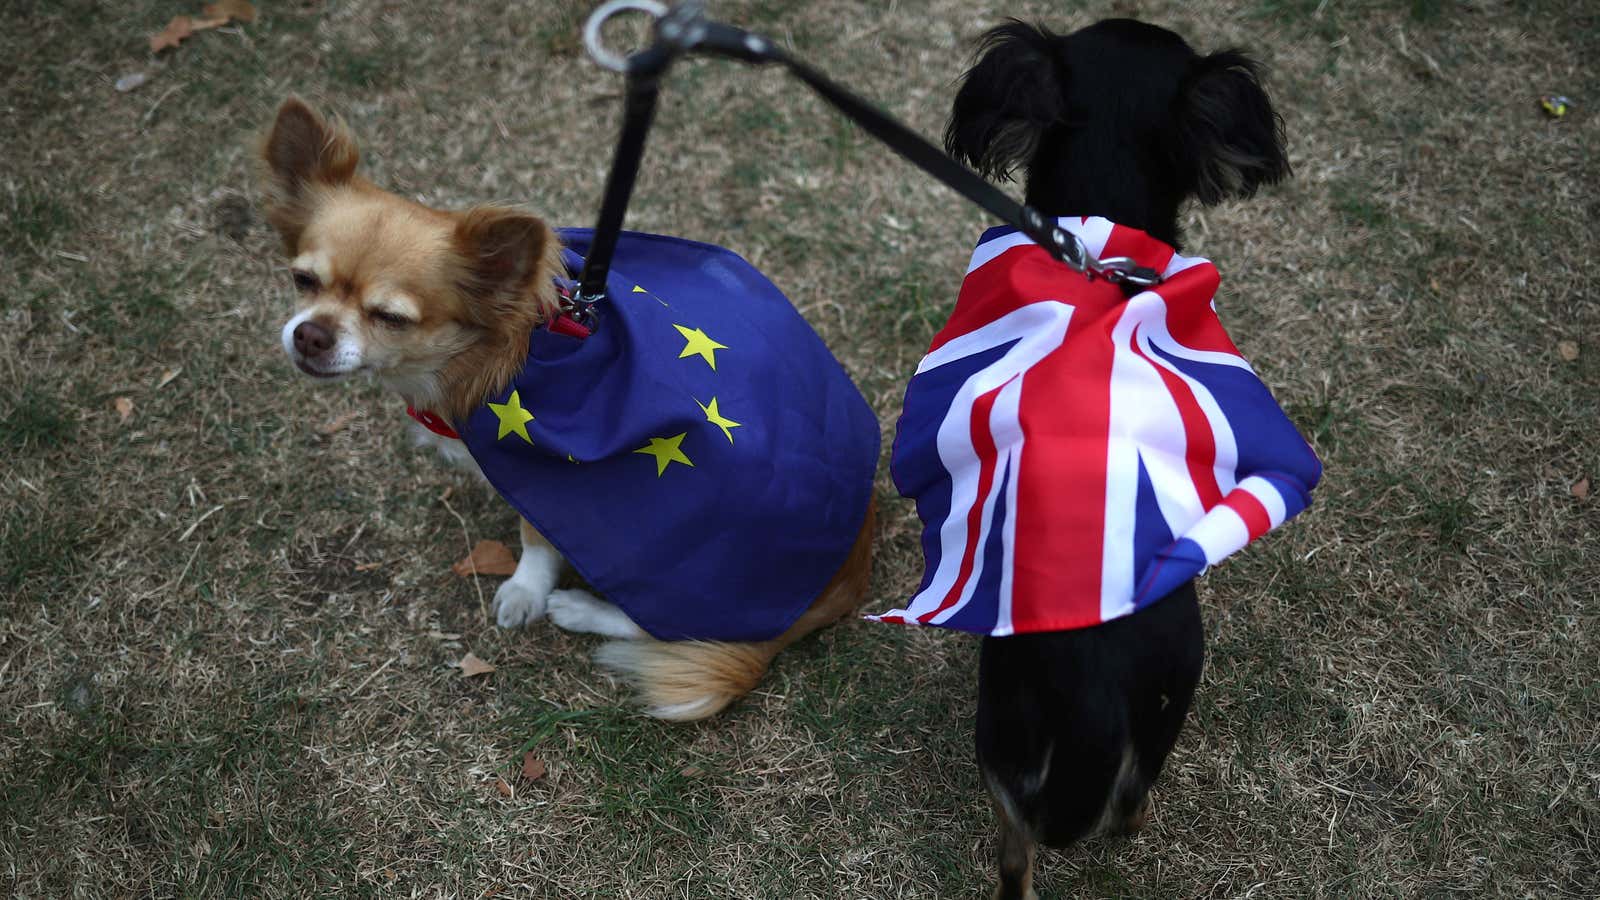 On Brexit's third anniversary, the UK has more reasons to regret it than ever